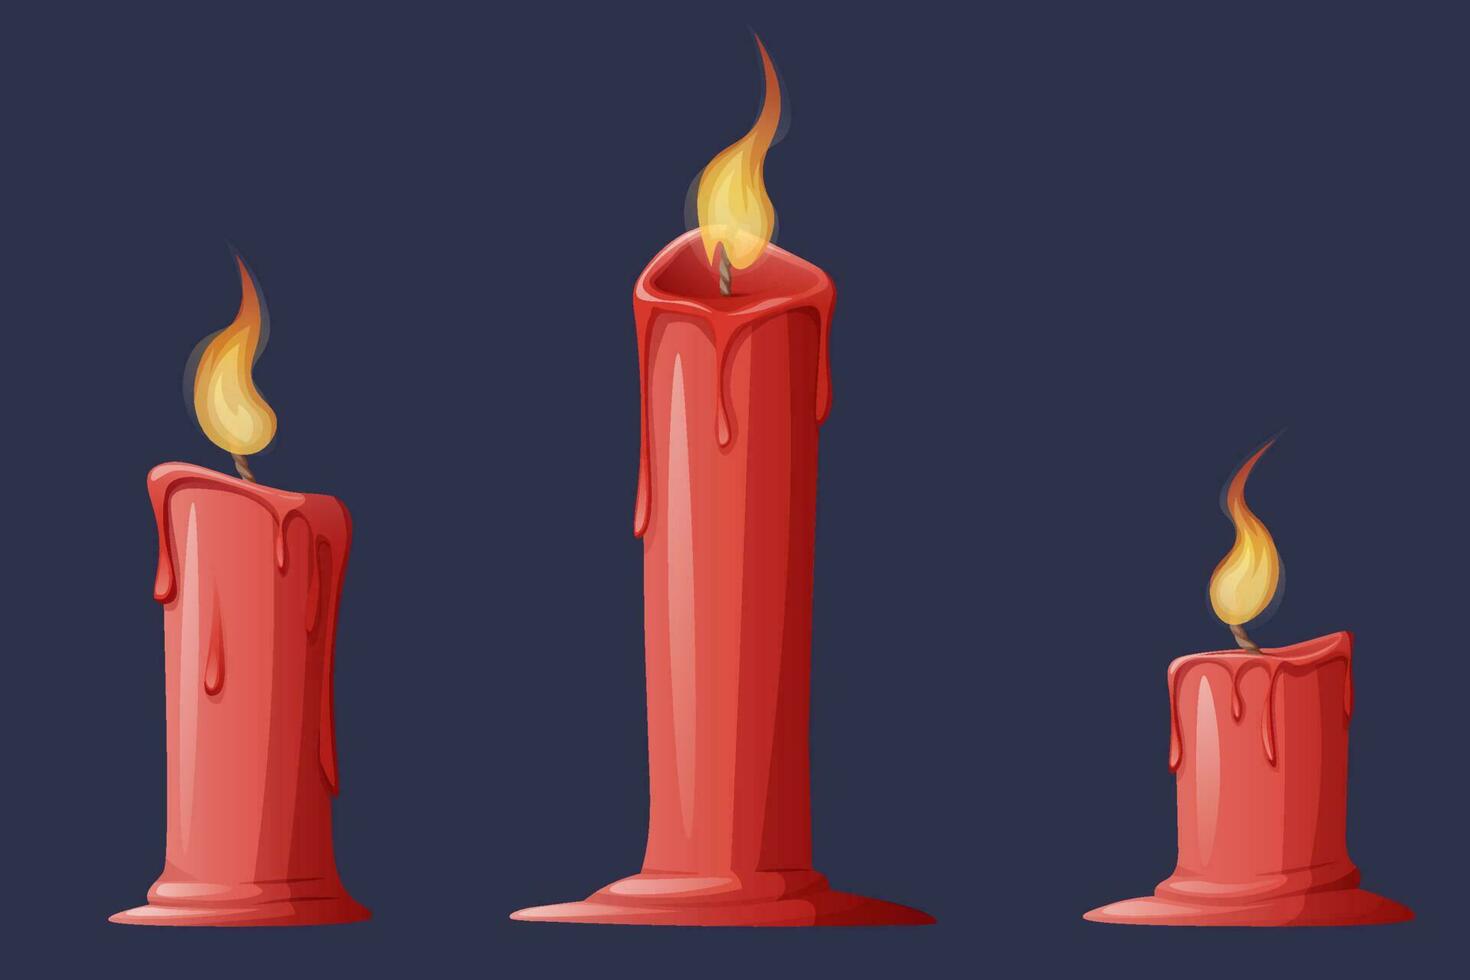 Burning red candle on a dark background. Vector flat illustration.